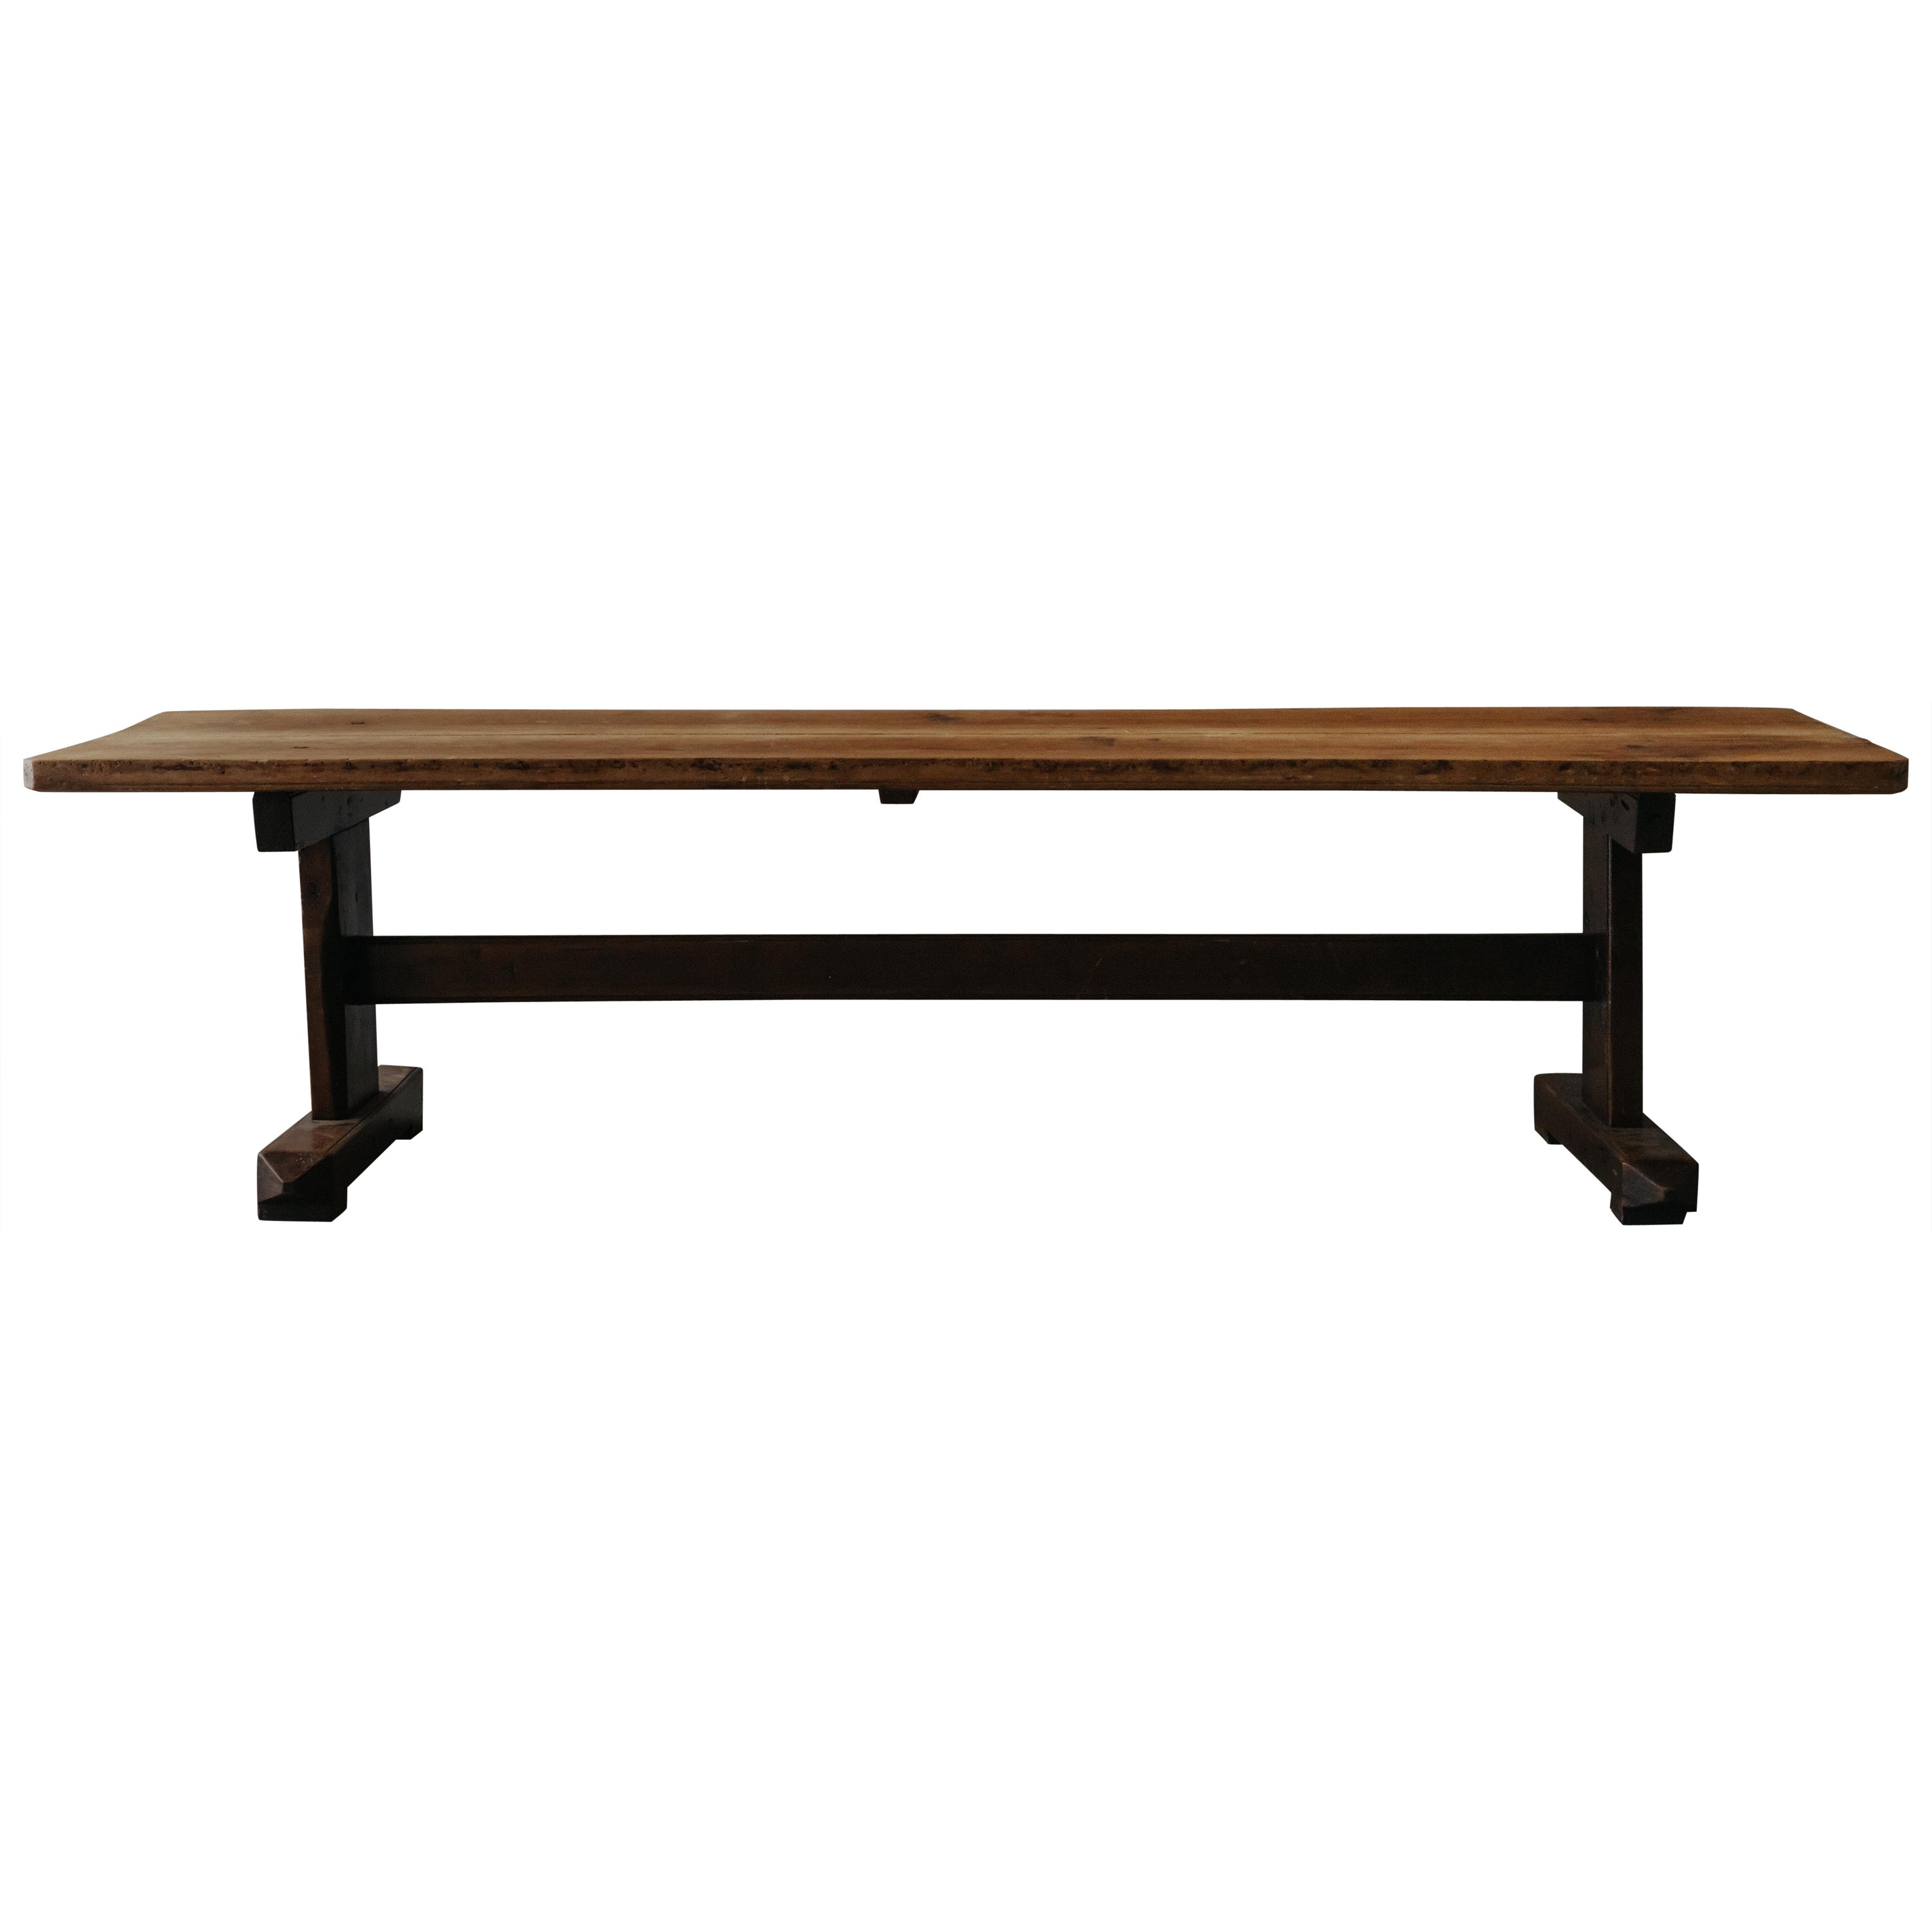 Large Oak Monastery Table From Italy, Circa 1880 For Sale